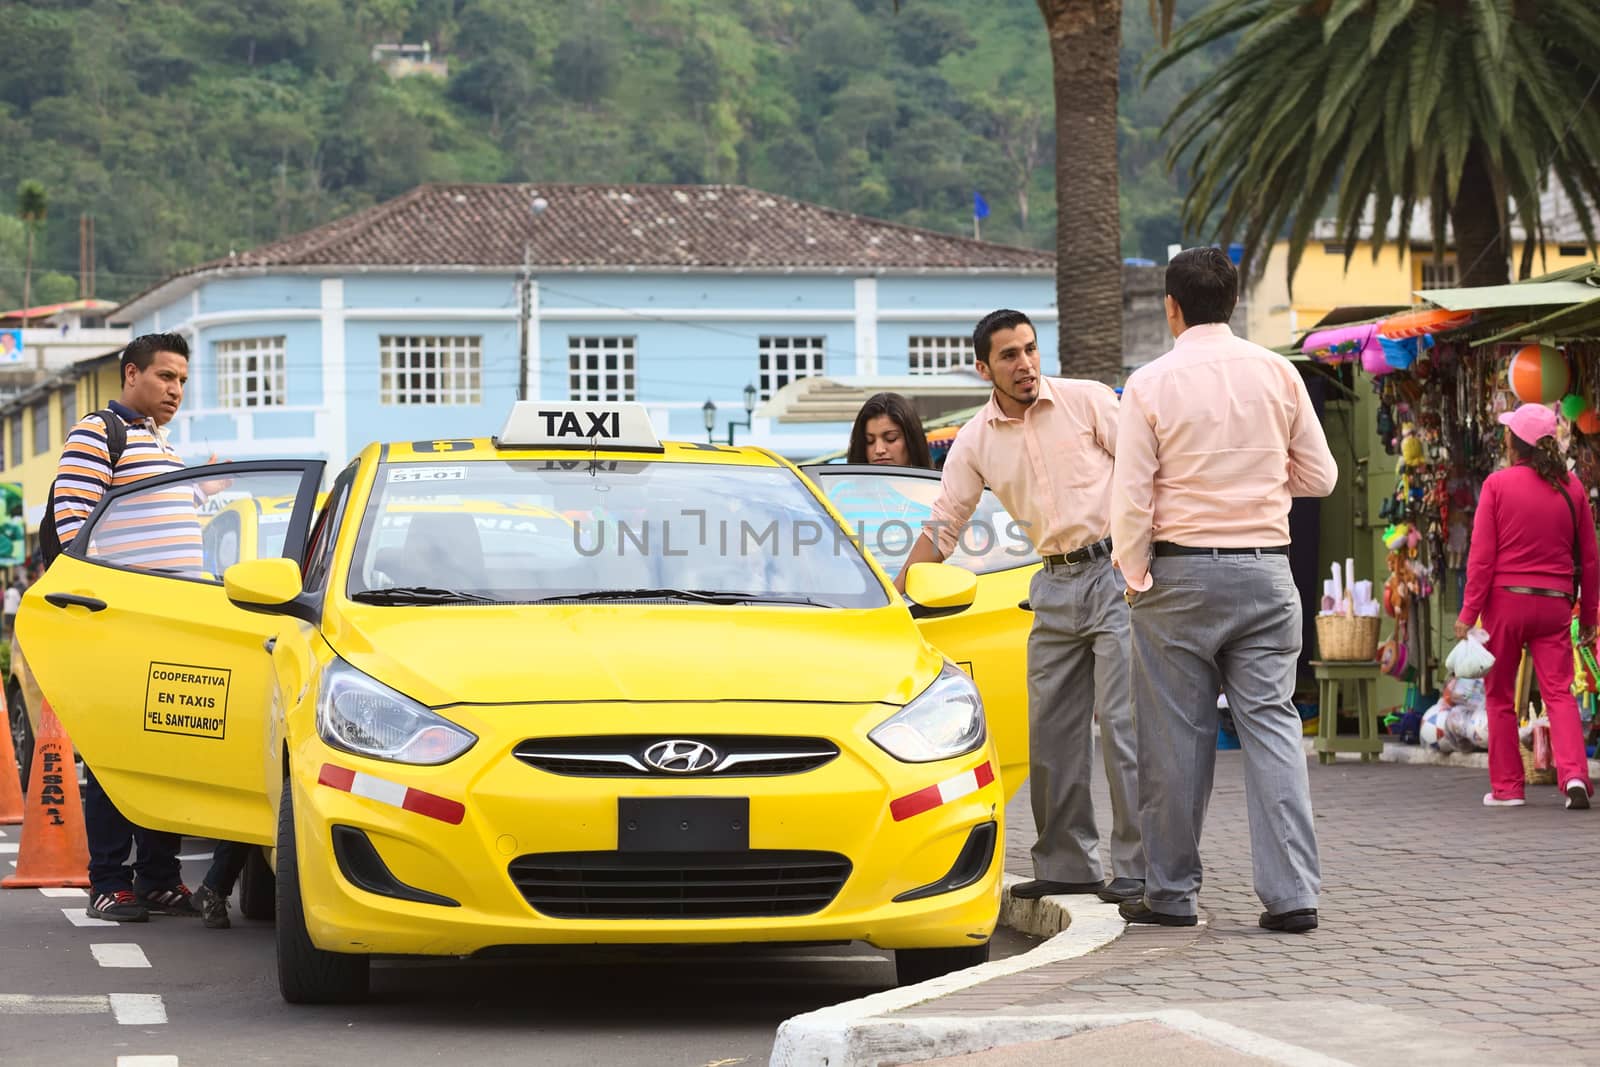 BANOS, ECUADOR - FEBRUARY 22, 2014: Unidentified taxi drivers talking at taxi stand on 12 de Noviembre Street outside the cathedral while passengers are getting into the car on February 22, 2014 in Banos, Ecuador.